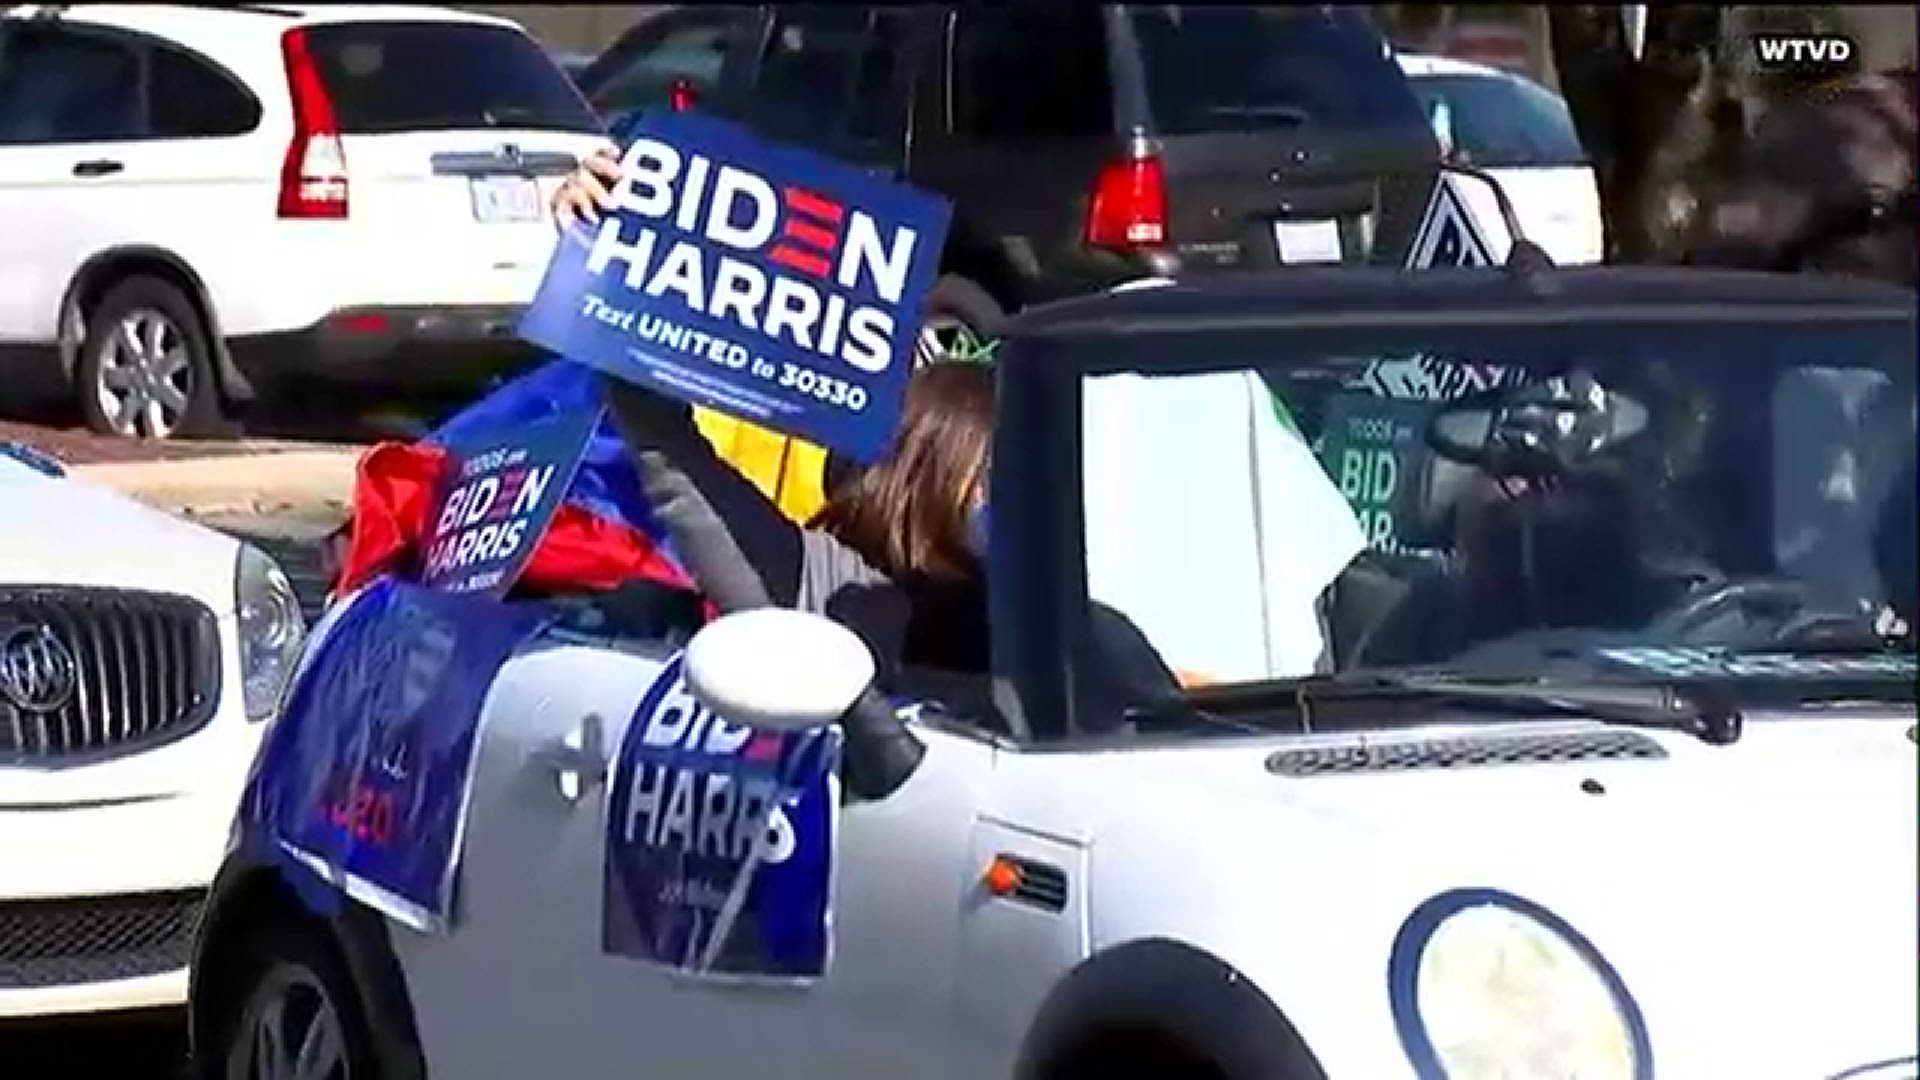 The Joe Biden campaign held a car parade in Durham, North Carolina on Sunday to highlight the enthusiasm of Latino voters.